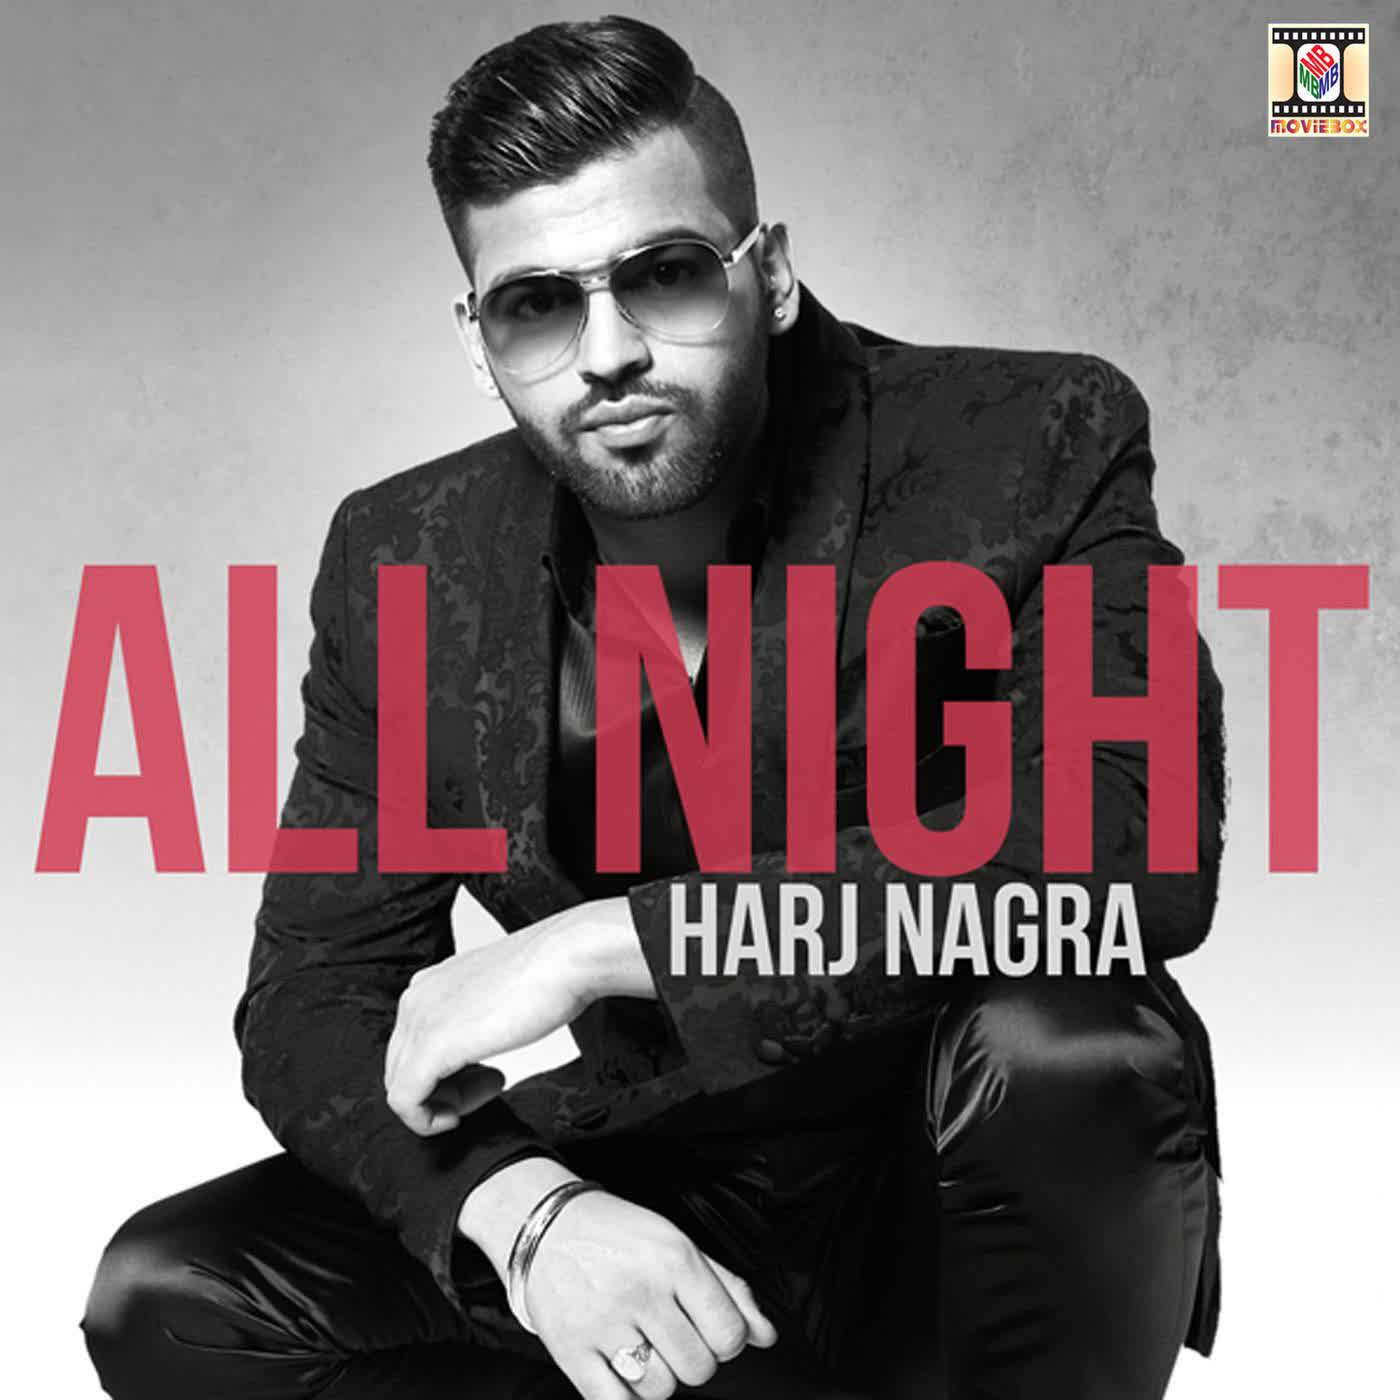 All Night Harj Nagra  Mp3 song download